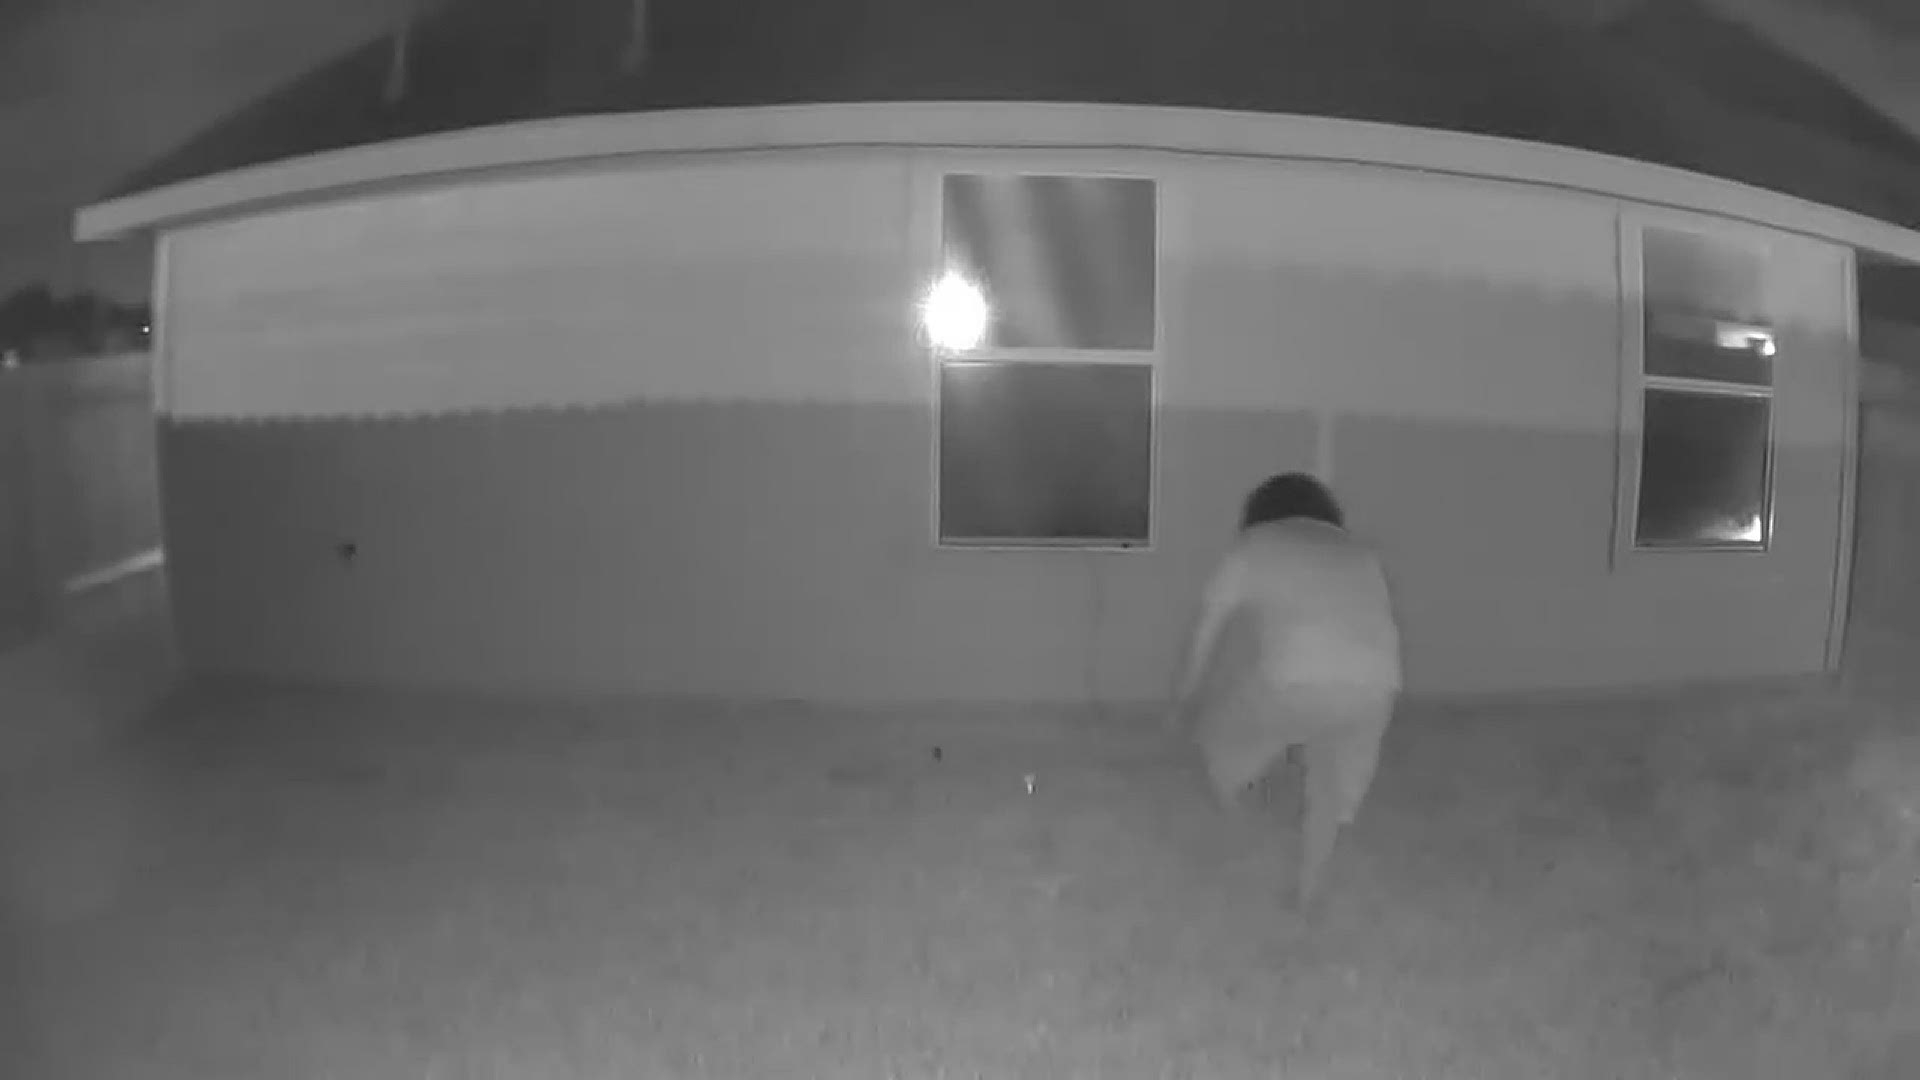 Adriana Garcia hid night vision cameras in her backyard and the video shows a barefoot man tip-toeing up to the bedroom window and peeking inside.